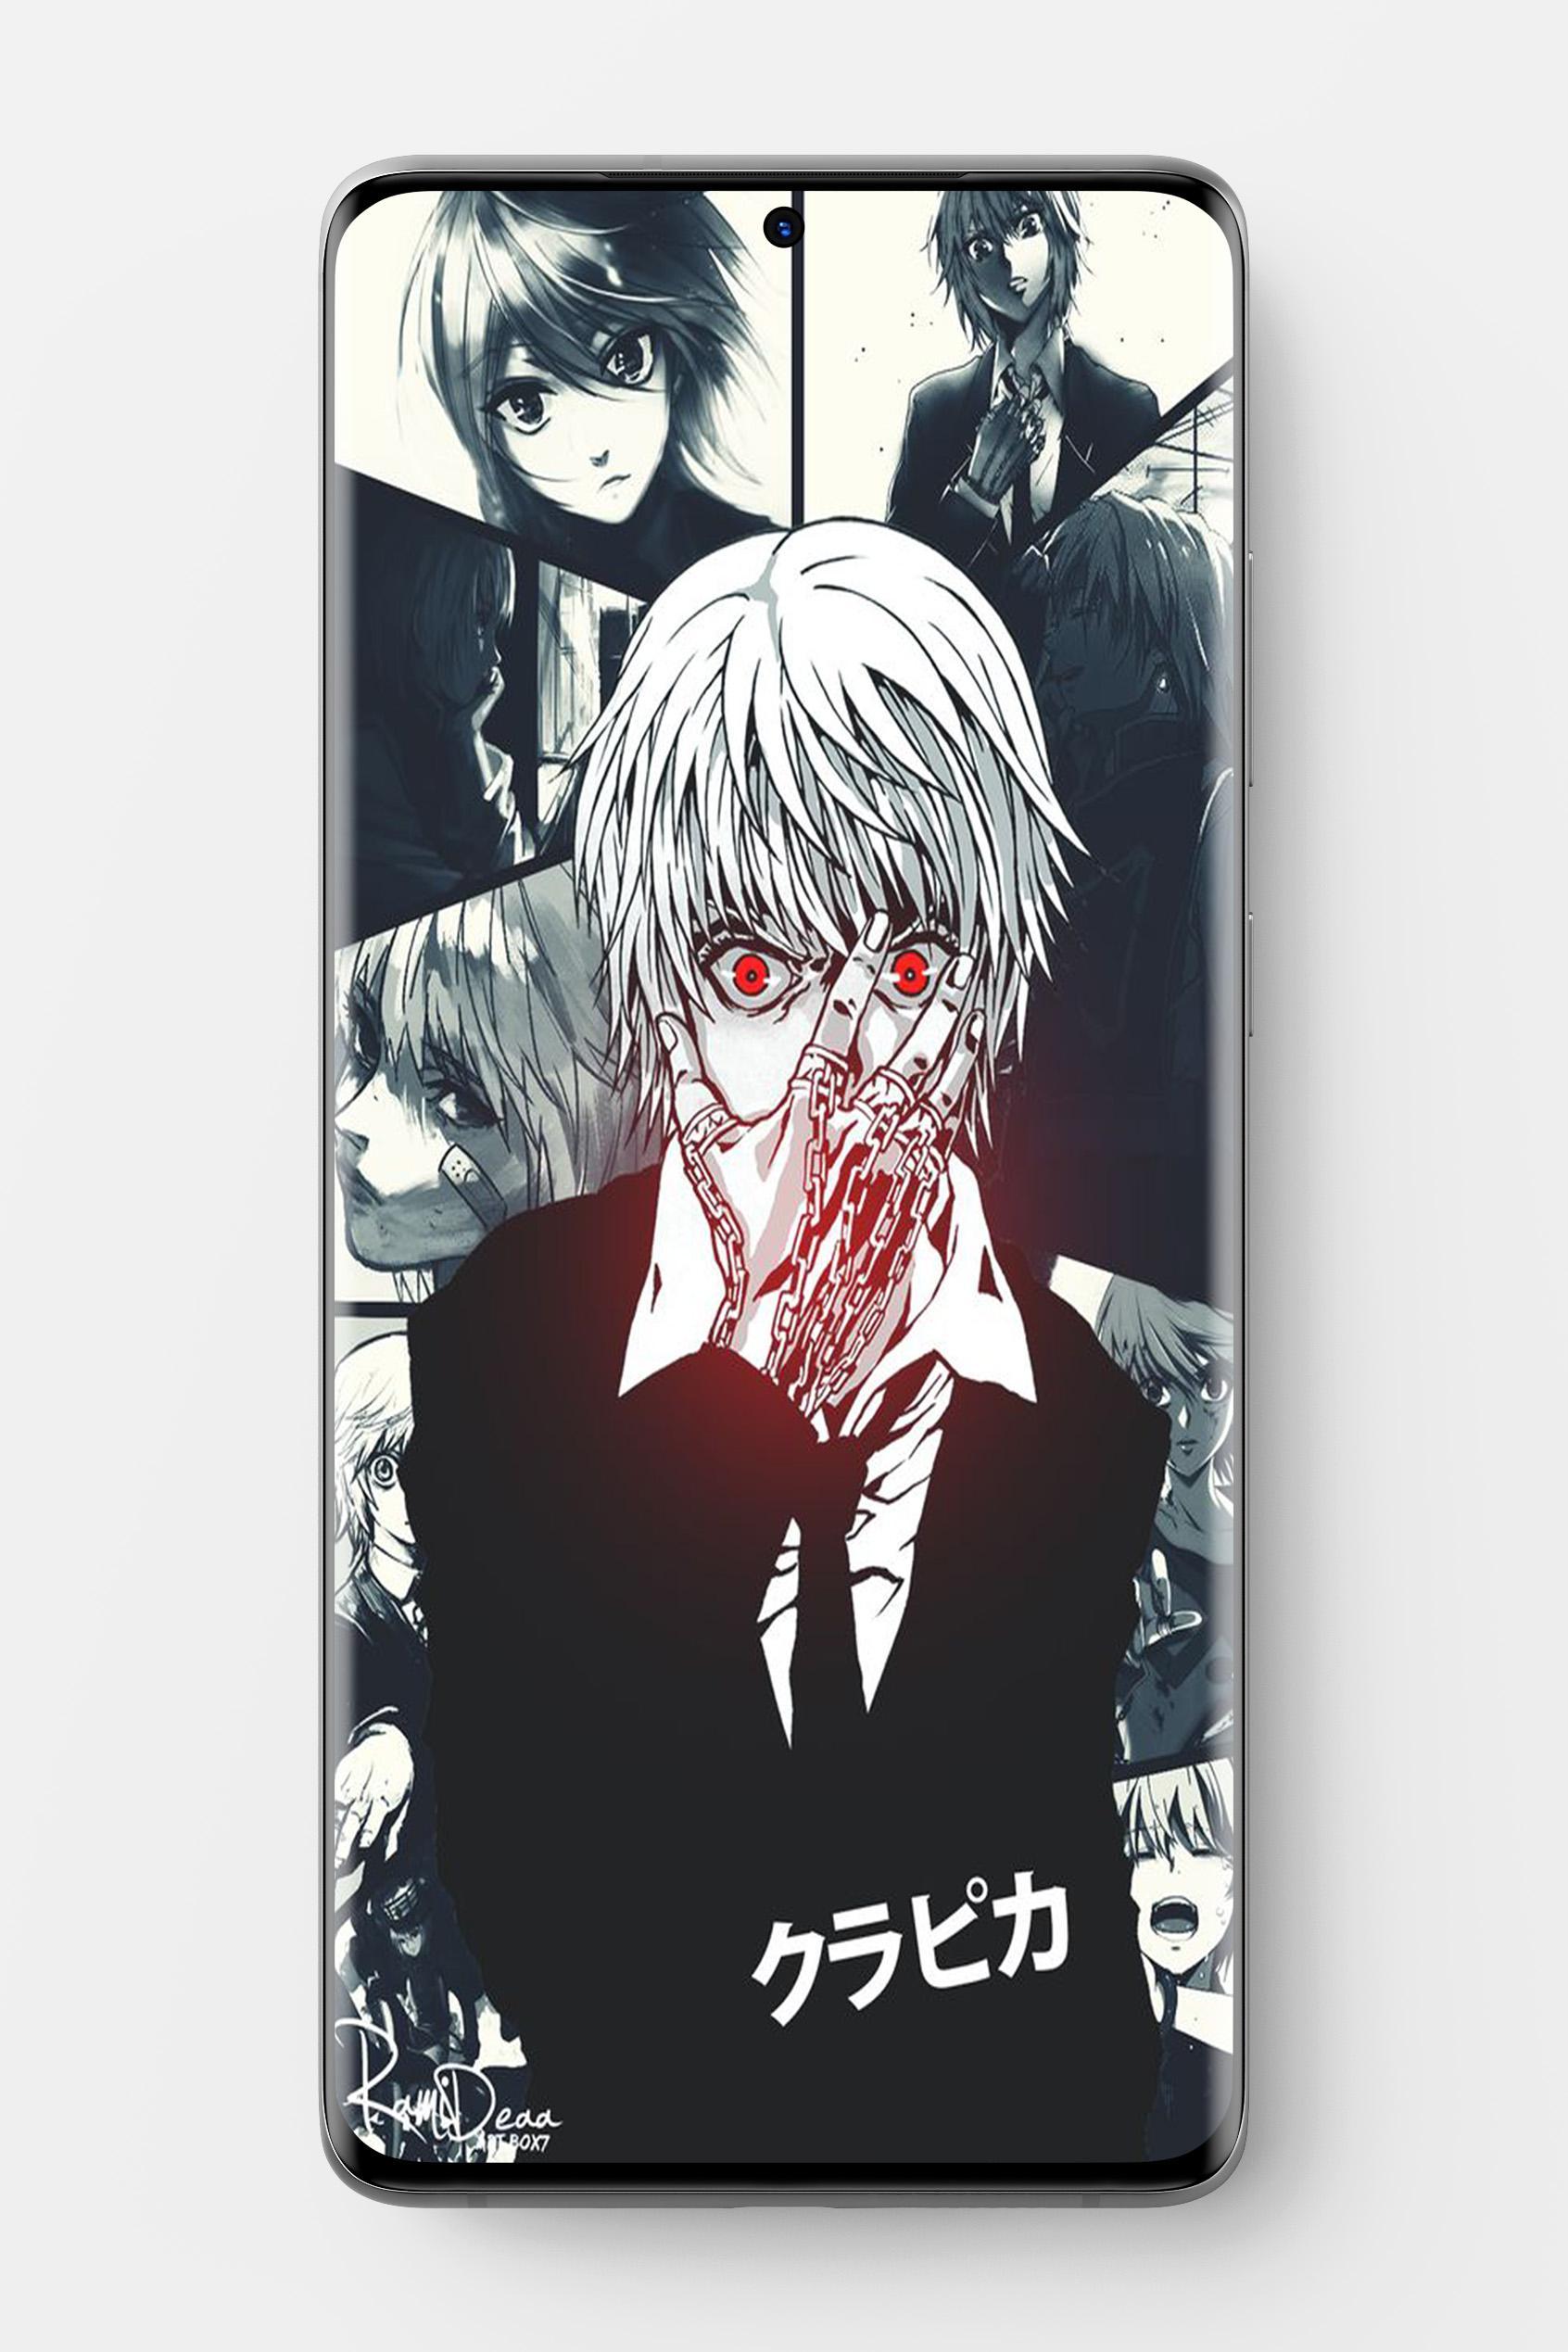 Anime Z Wallpaper For Android Apk Download